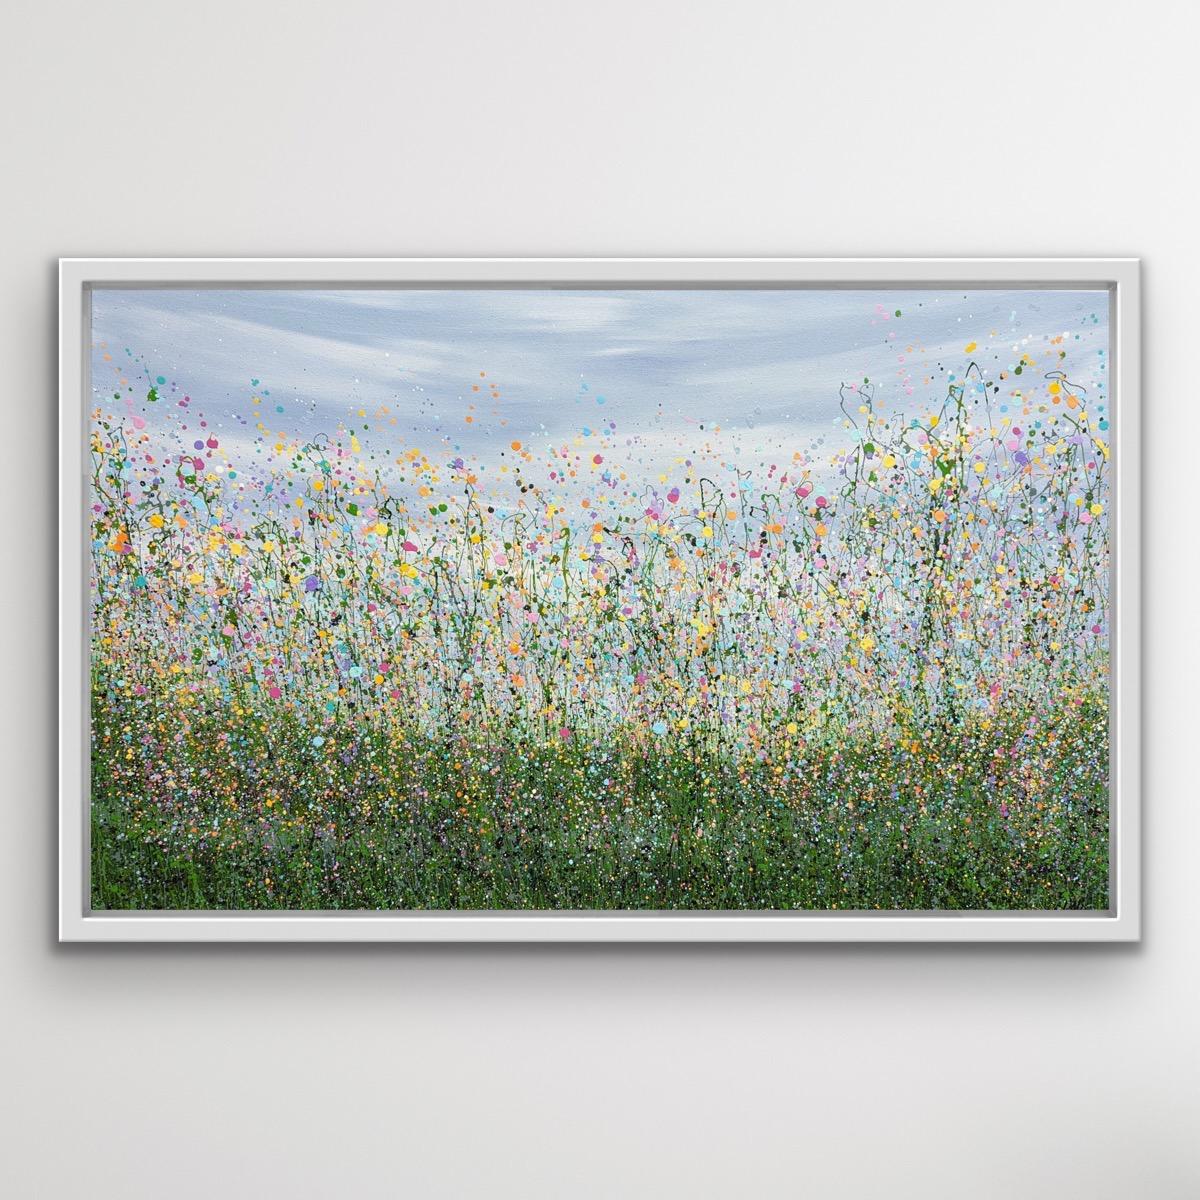 Serene Light Meadows, Bright Floral Landscapes Paintings, Flower Artwork - Gray Abstract Painting by Lucy Moore